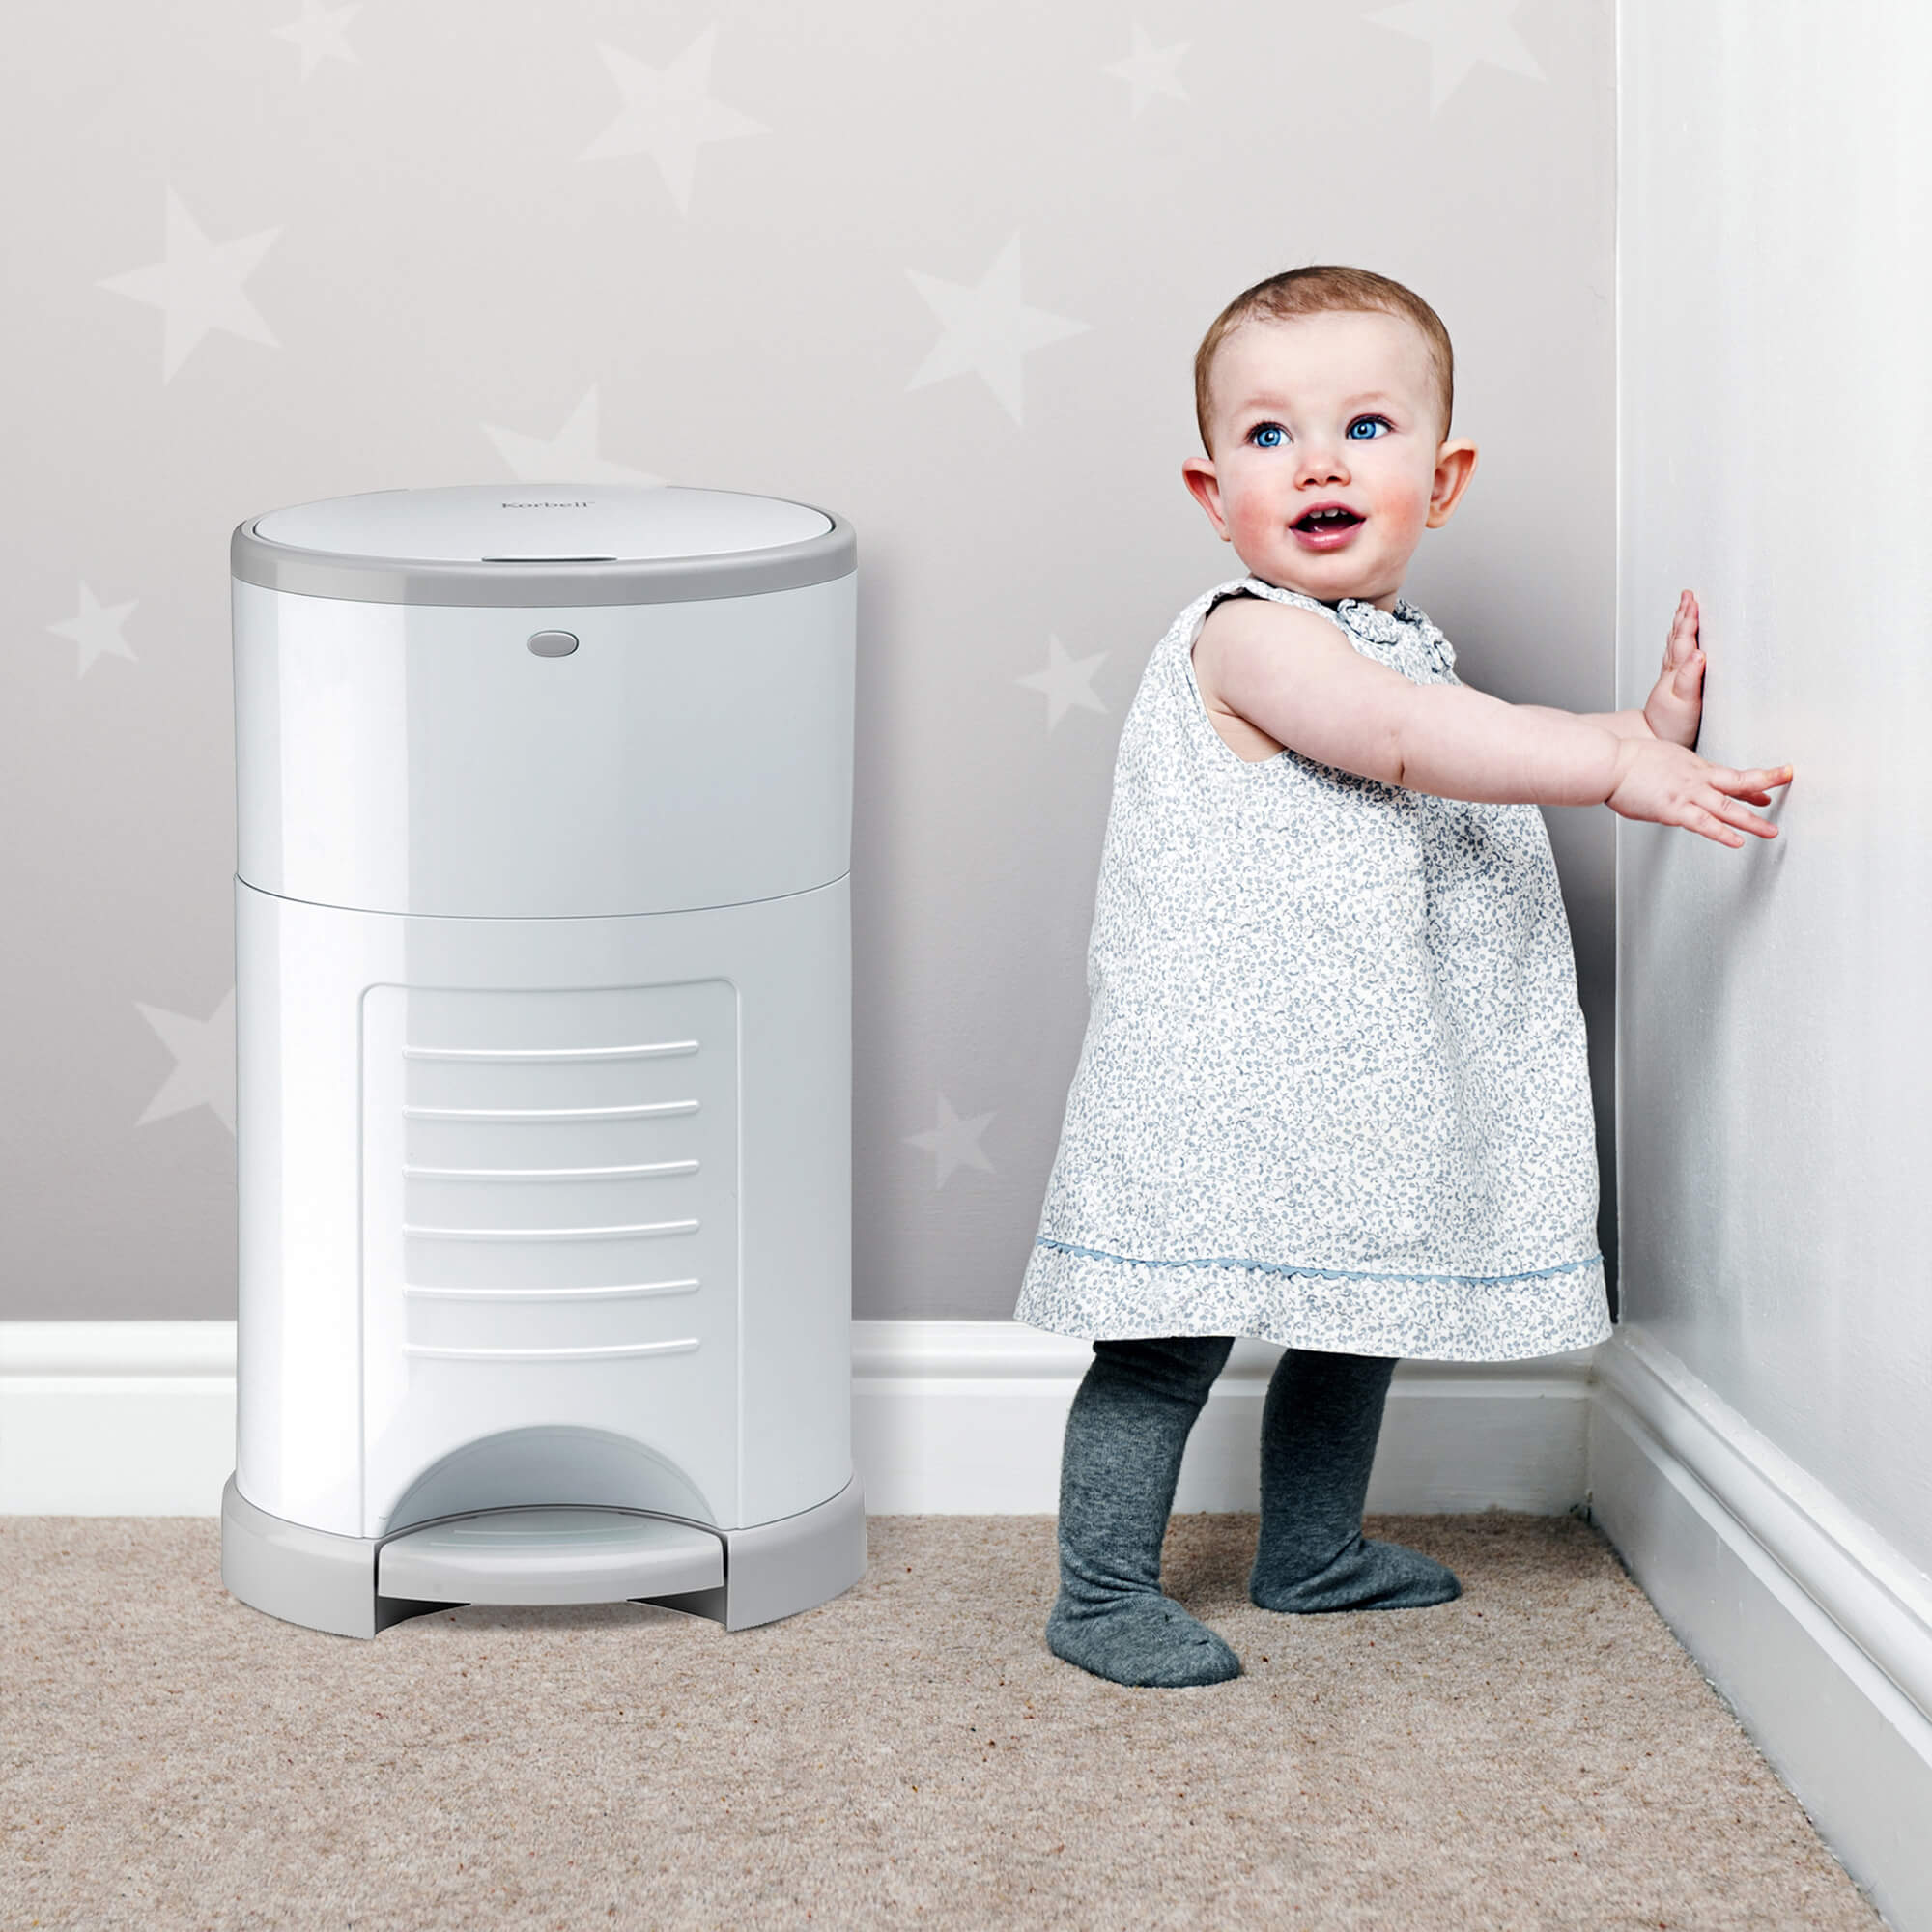 Korbell Nappy Bin Review – What's Good To Do